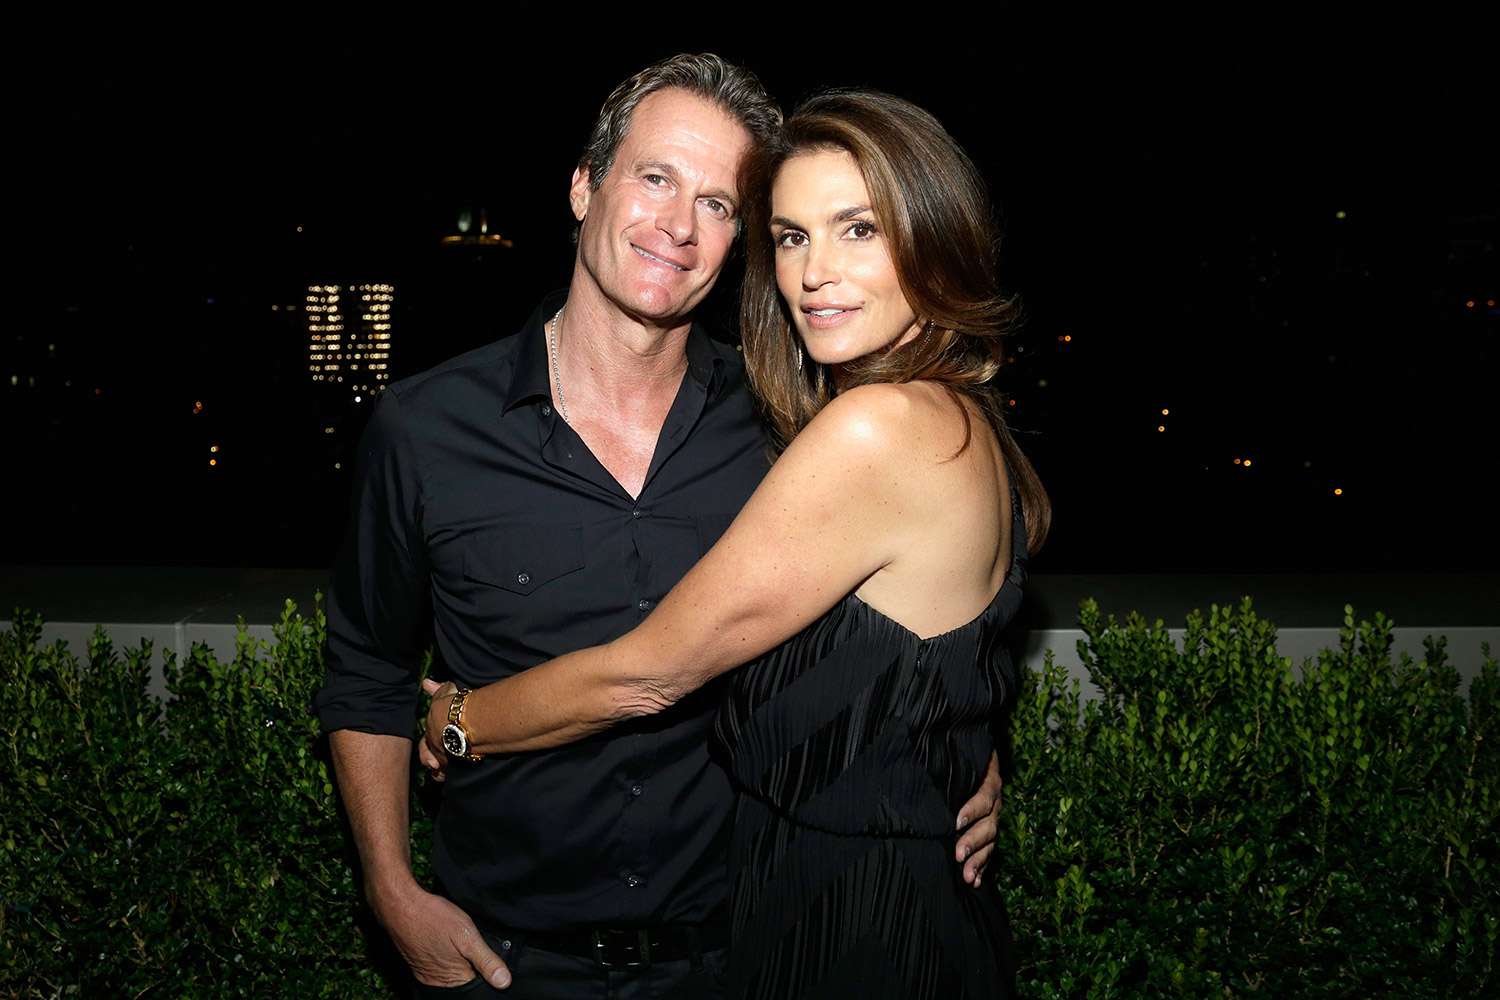 How Cindy Crawford and Husband Rande Gerber Have Remained Happily Married for 25 Years: ‘We Don’t Fight Ugly’ (Exclusive)